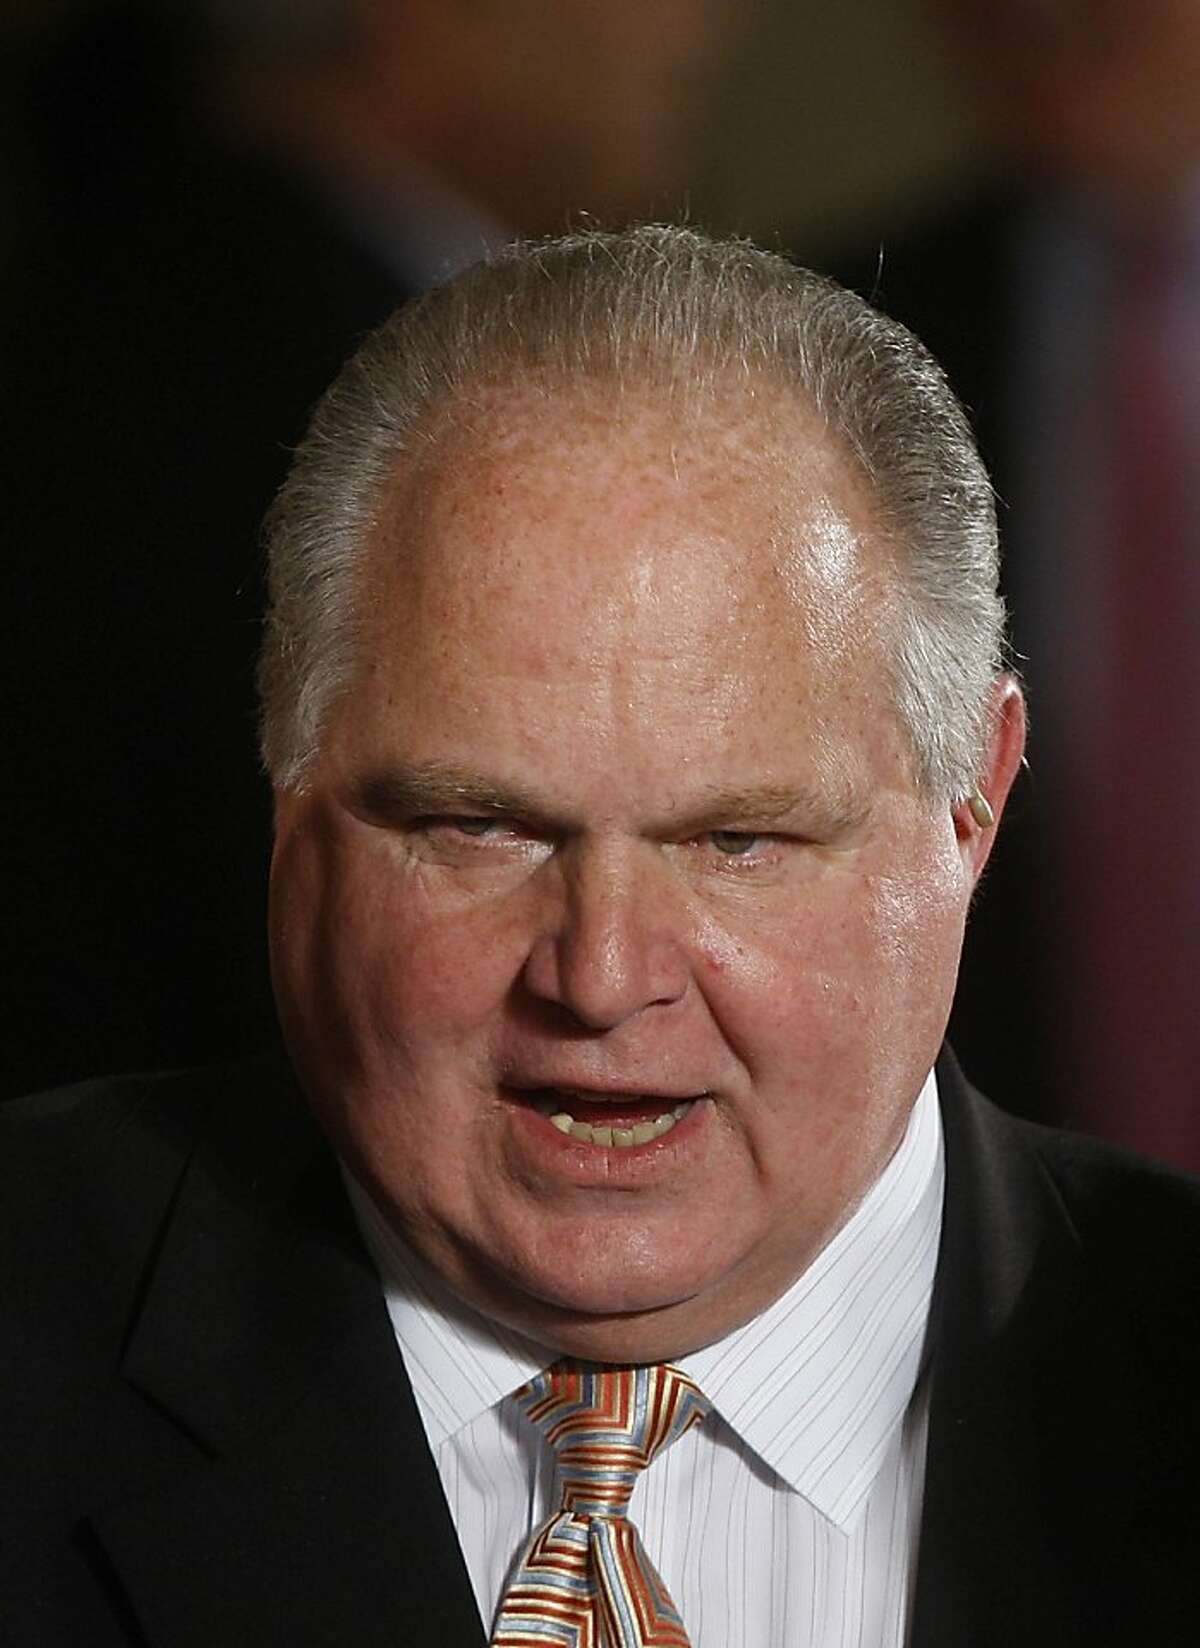 FILE - In this Jan. 13, 2009 file photo, conservative talk show host Rush Limbaugh talks with guests in the East Room of the White House in Washington. Limbaugh apologized Saturday, March 3, 2012, to a Georgetown University law student he had branded a "slut" and "prostitute" after fellow Republicans as well as Democrats criticized him and several advertisers left his program. The student, Sandra Fluke, had testified to congressional Democrats in support of their national health care policy that would compel her college to offer health plans that cover her birth control. (AP Photo/Ron Edmonds, File)